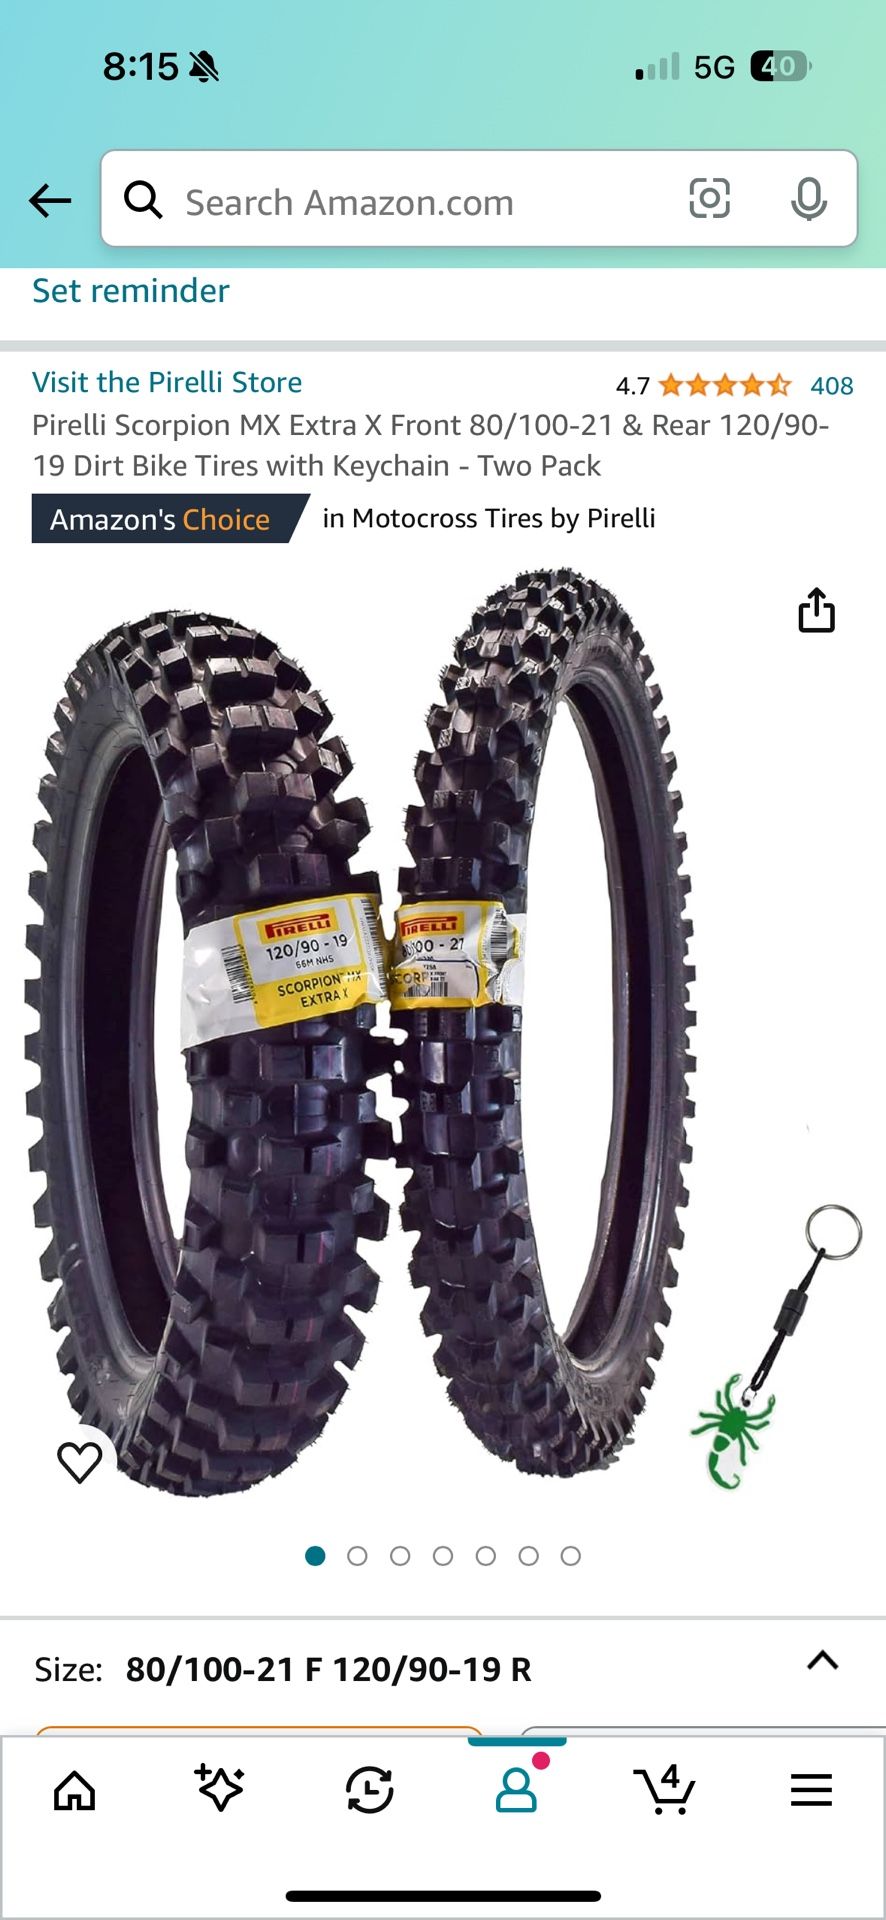 Pirelli Scorpion MX Extra X Front 80/100-21 & Rear 120/90- 19 Dirt Bike Tires with Keychain - Two Pack